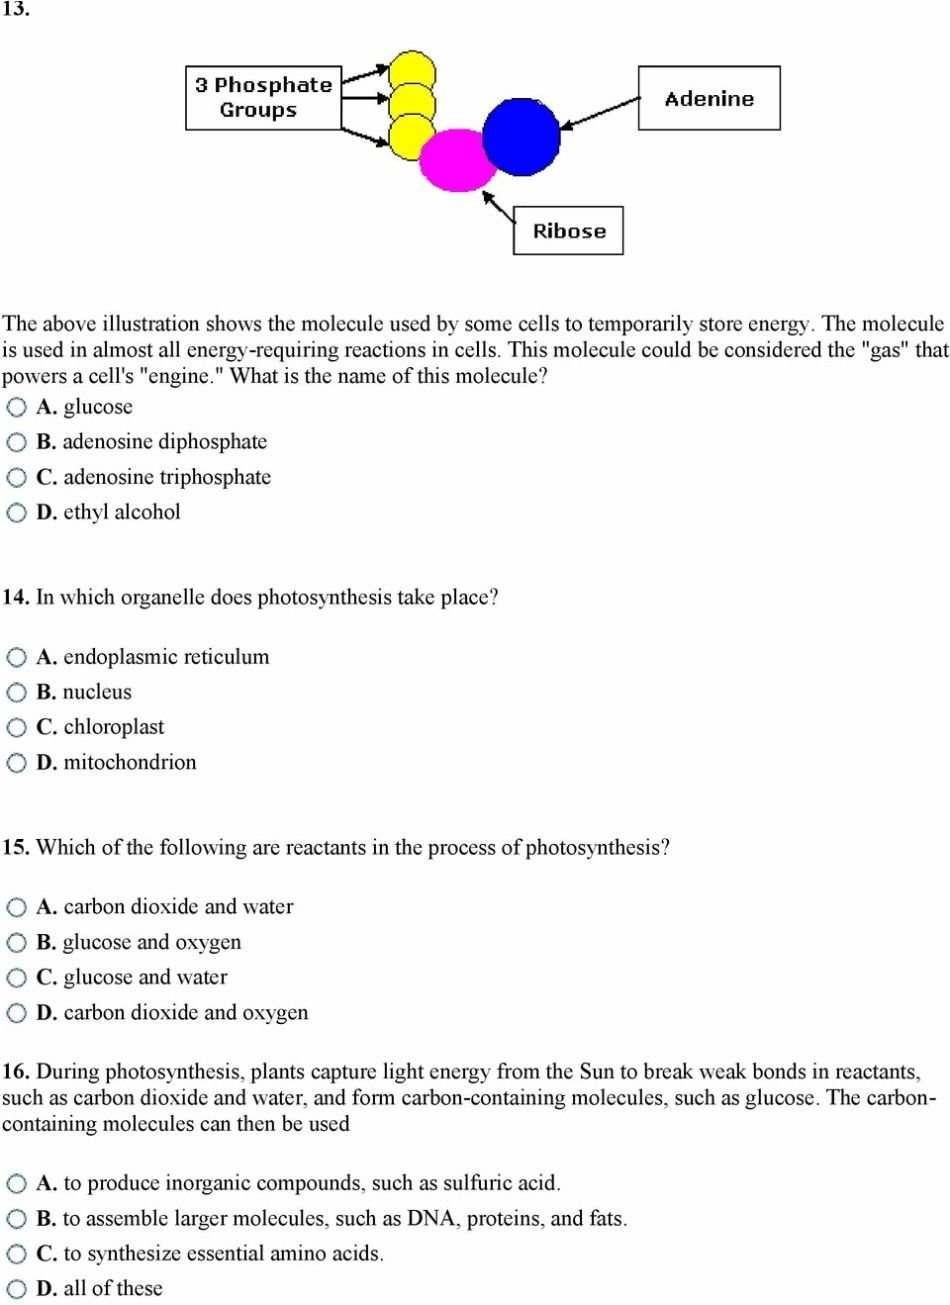 Photosynthesis Worksheet Middle School  Briefencounters With Photosynthesis Worksheet Middle School